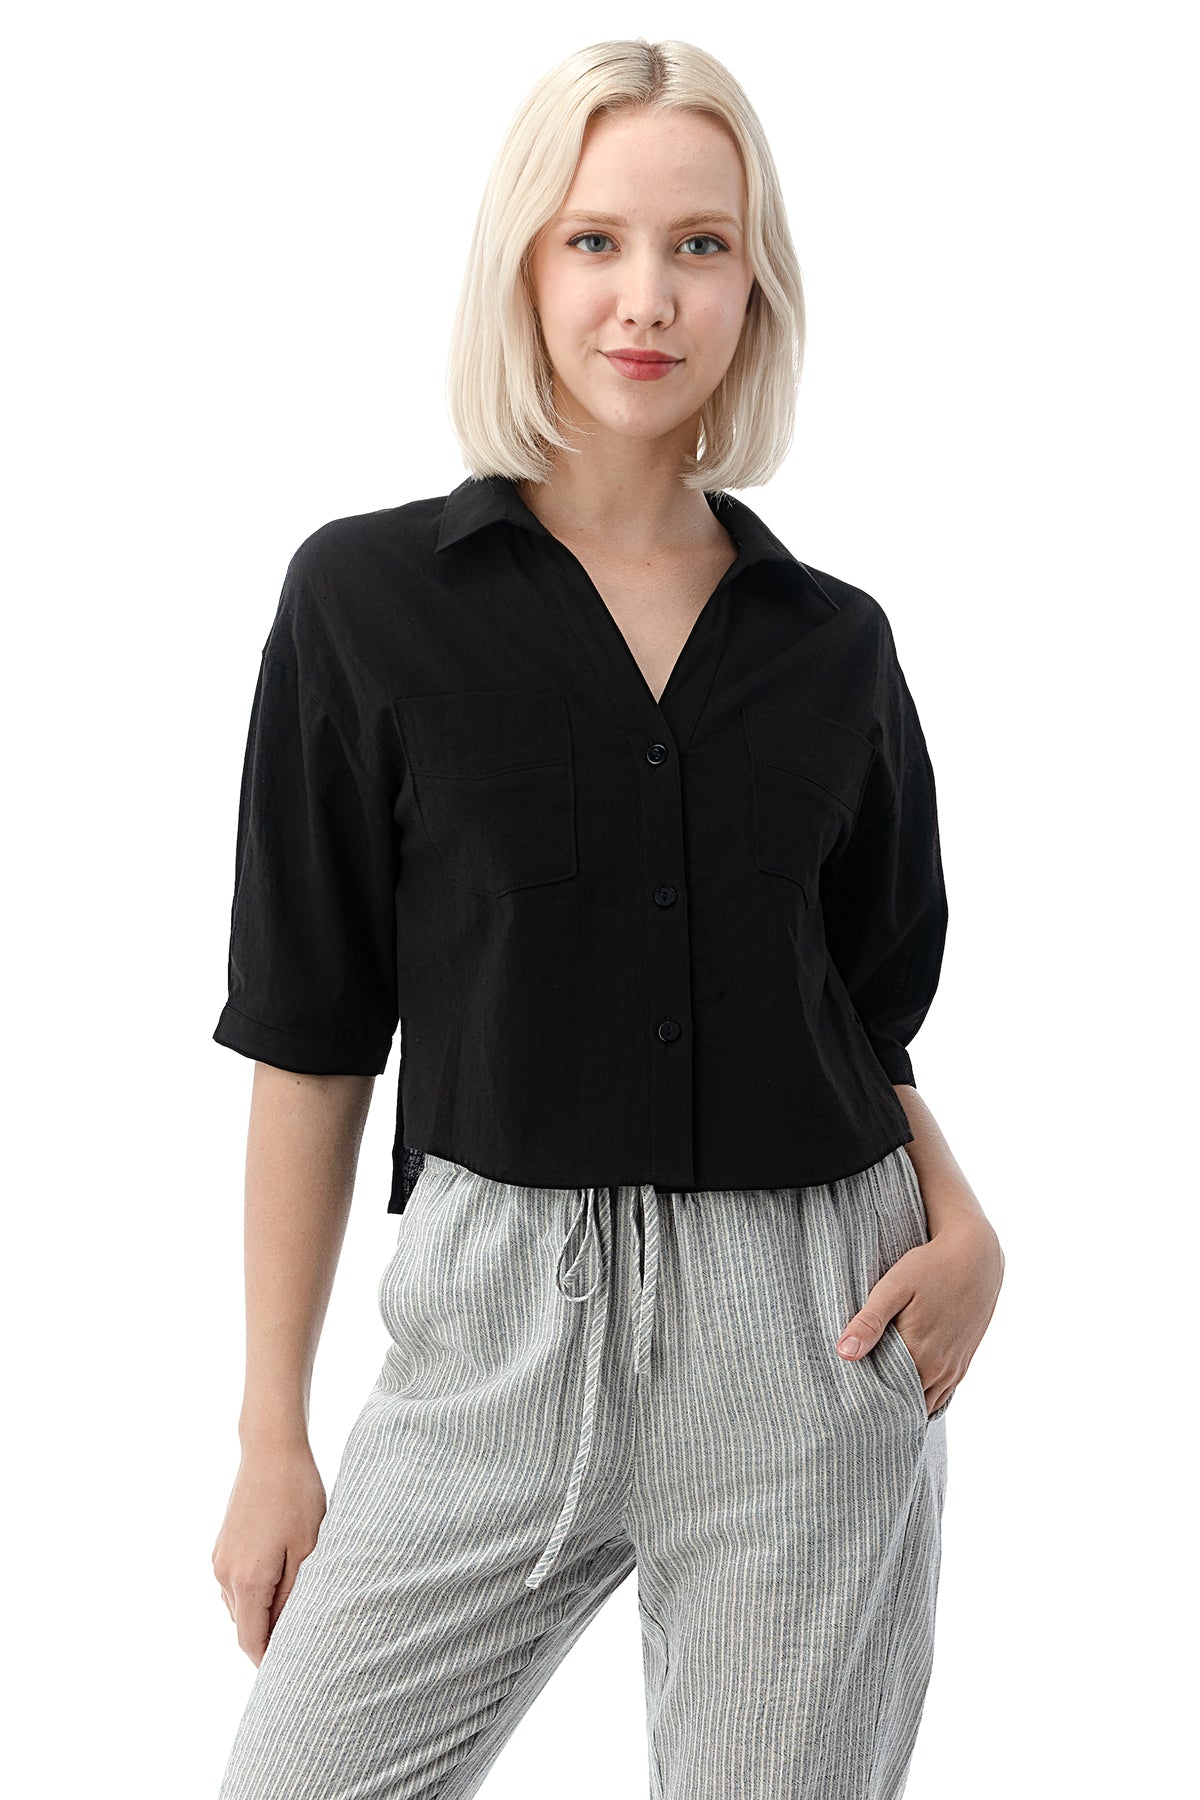 EDGY Land Girl's and Women's Collared V-Neck Side Slit Button Down 1/2 Sleeve Fashion Shirt